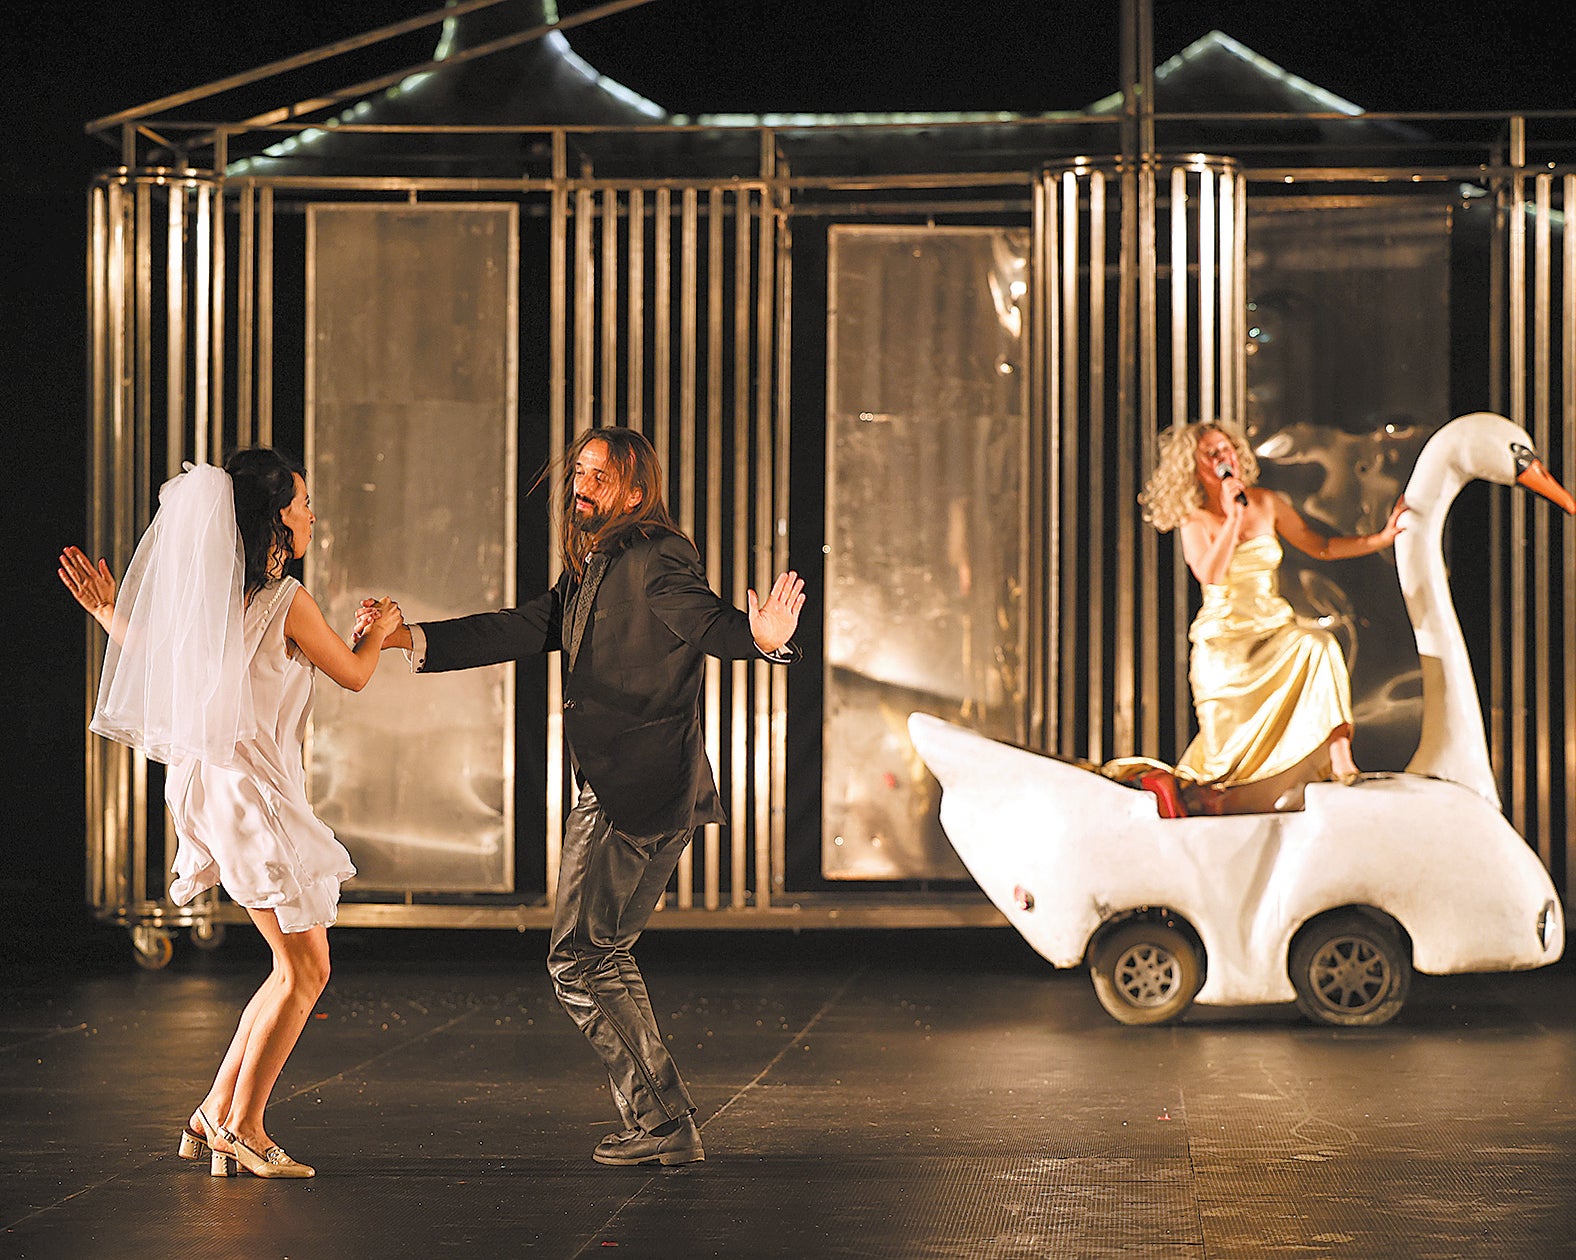 Open-air production Eurydyka is based on the ancient Greek myth of Eurydice and Orpheus